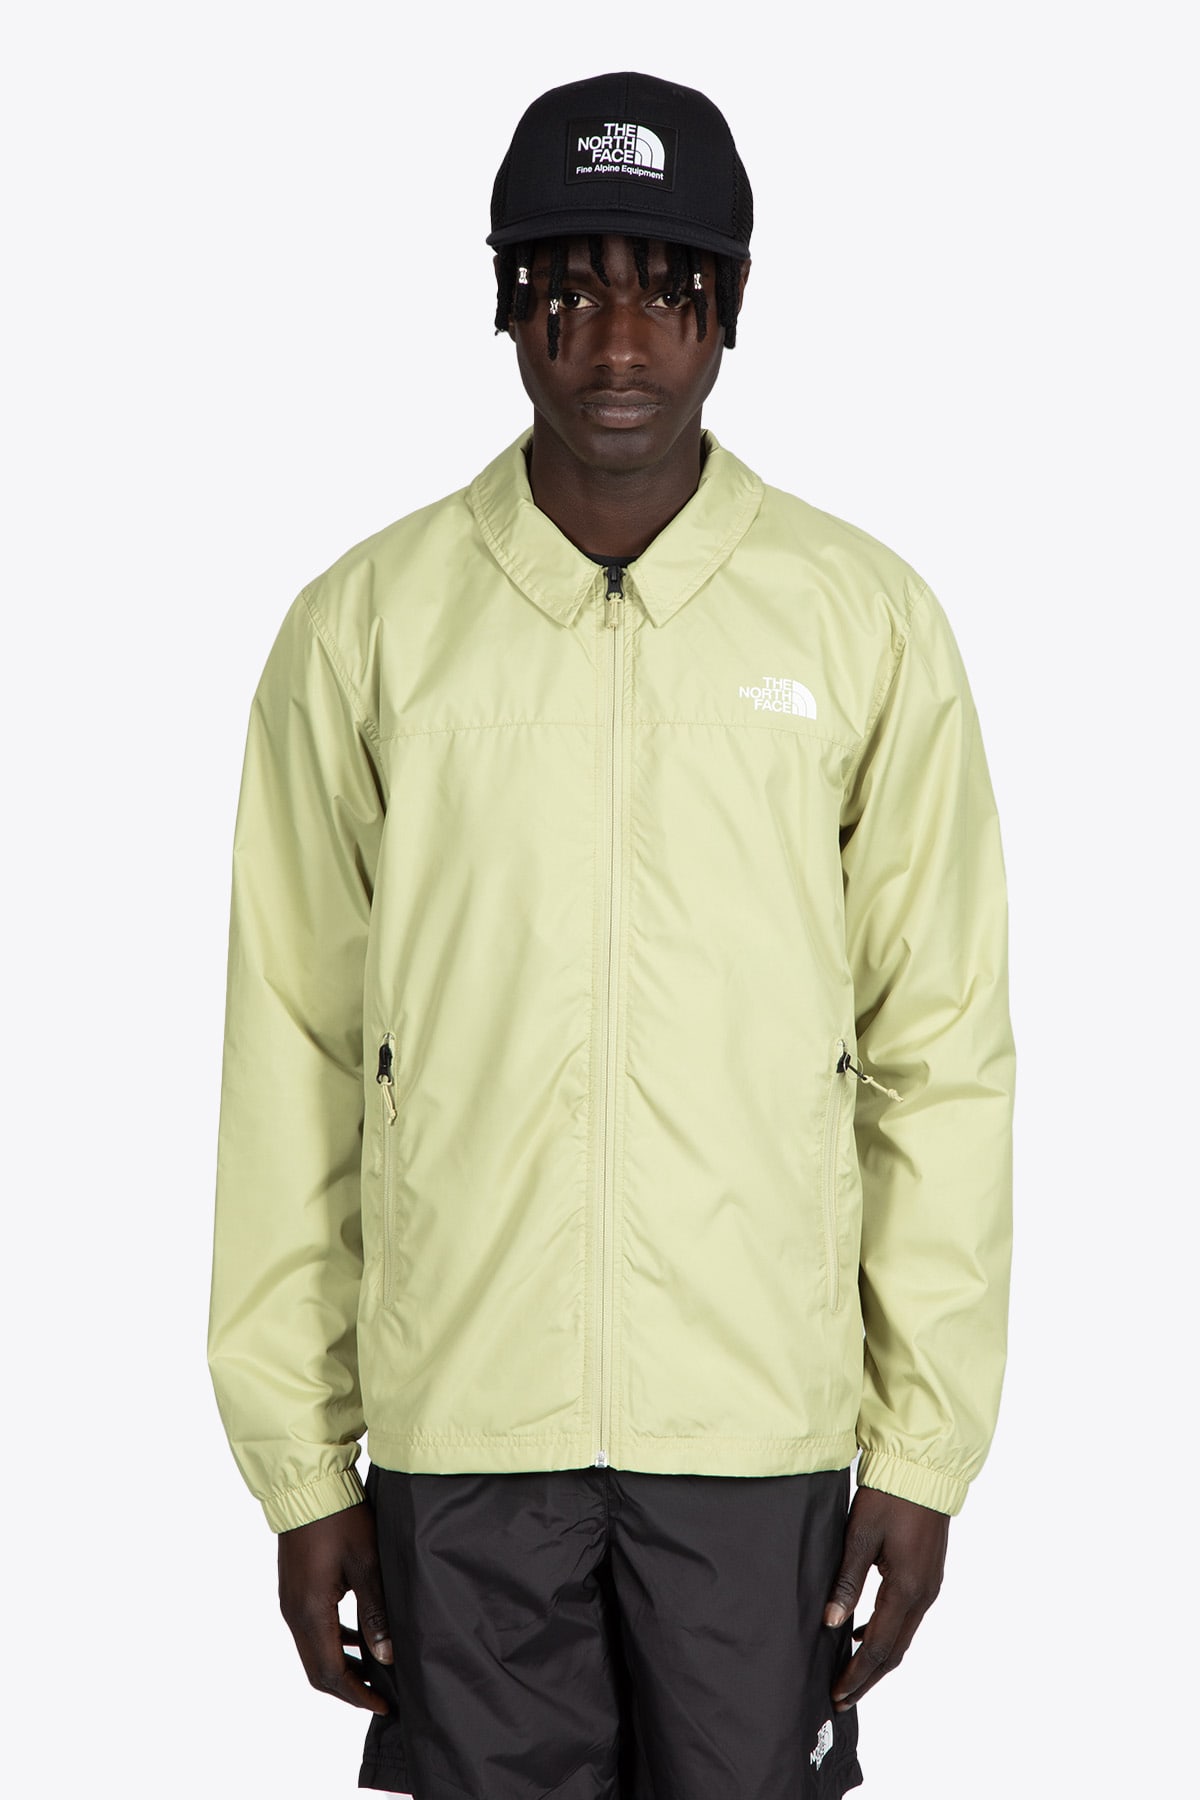 The North Face M Cyclone Coaches Jacket Weeping Lime green nylon coach jacket - M cyclone coaches jacket weeping